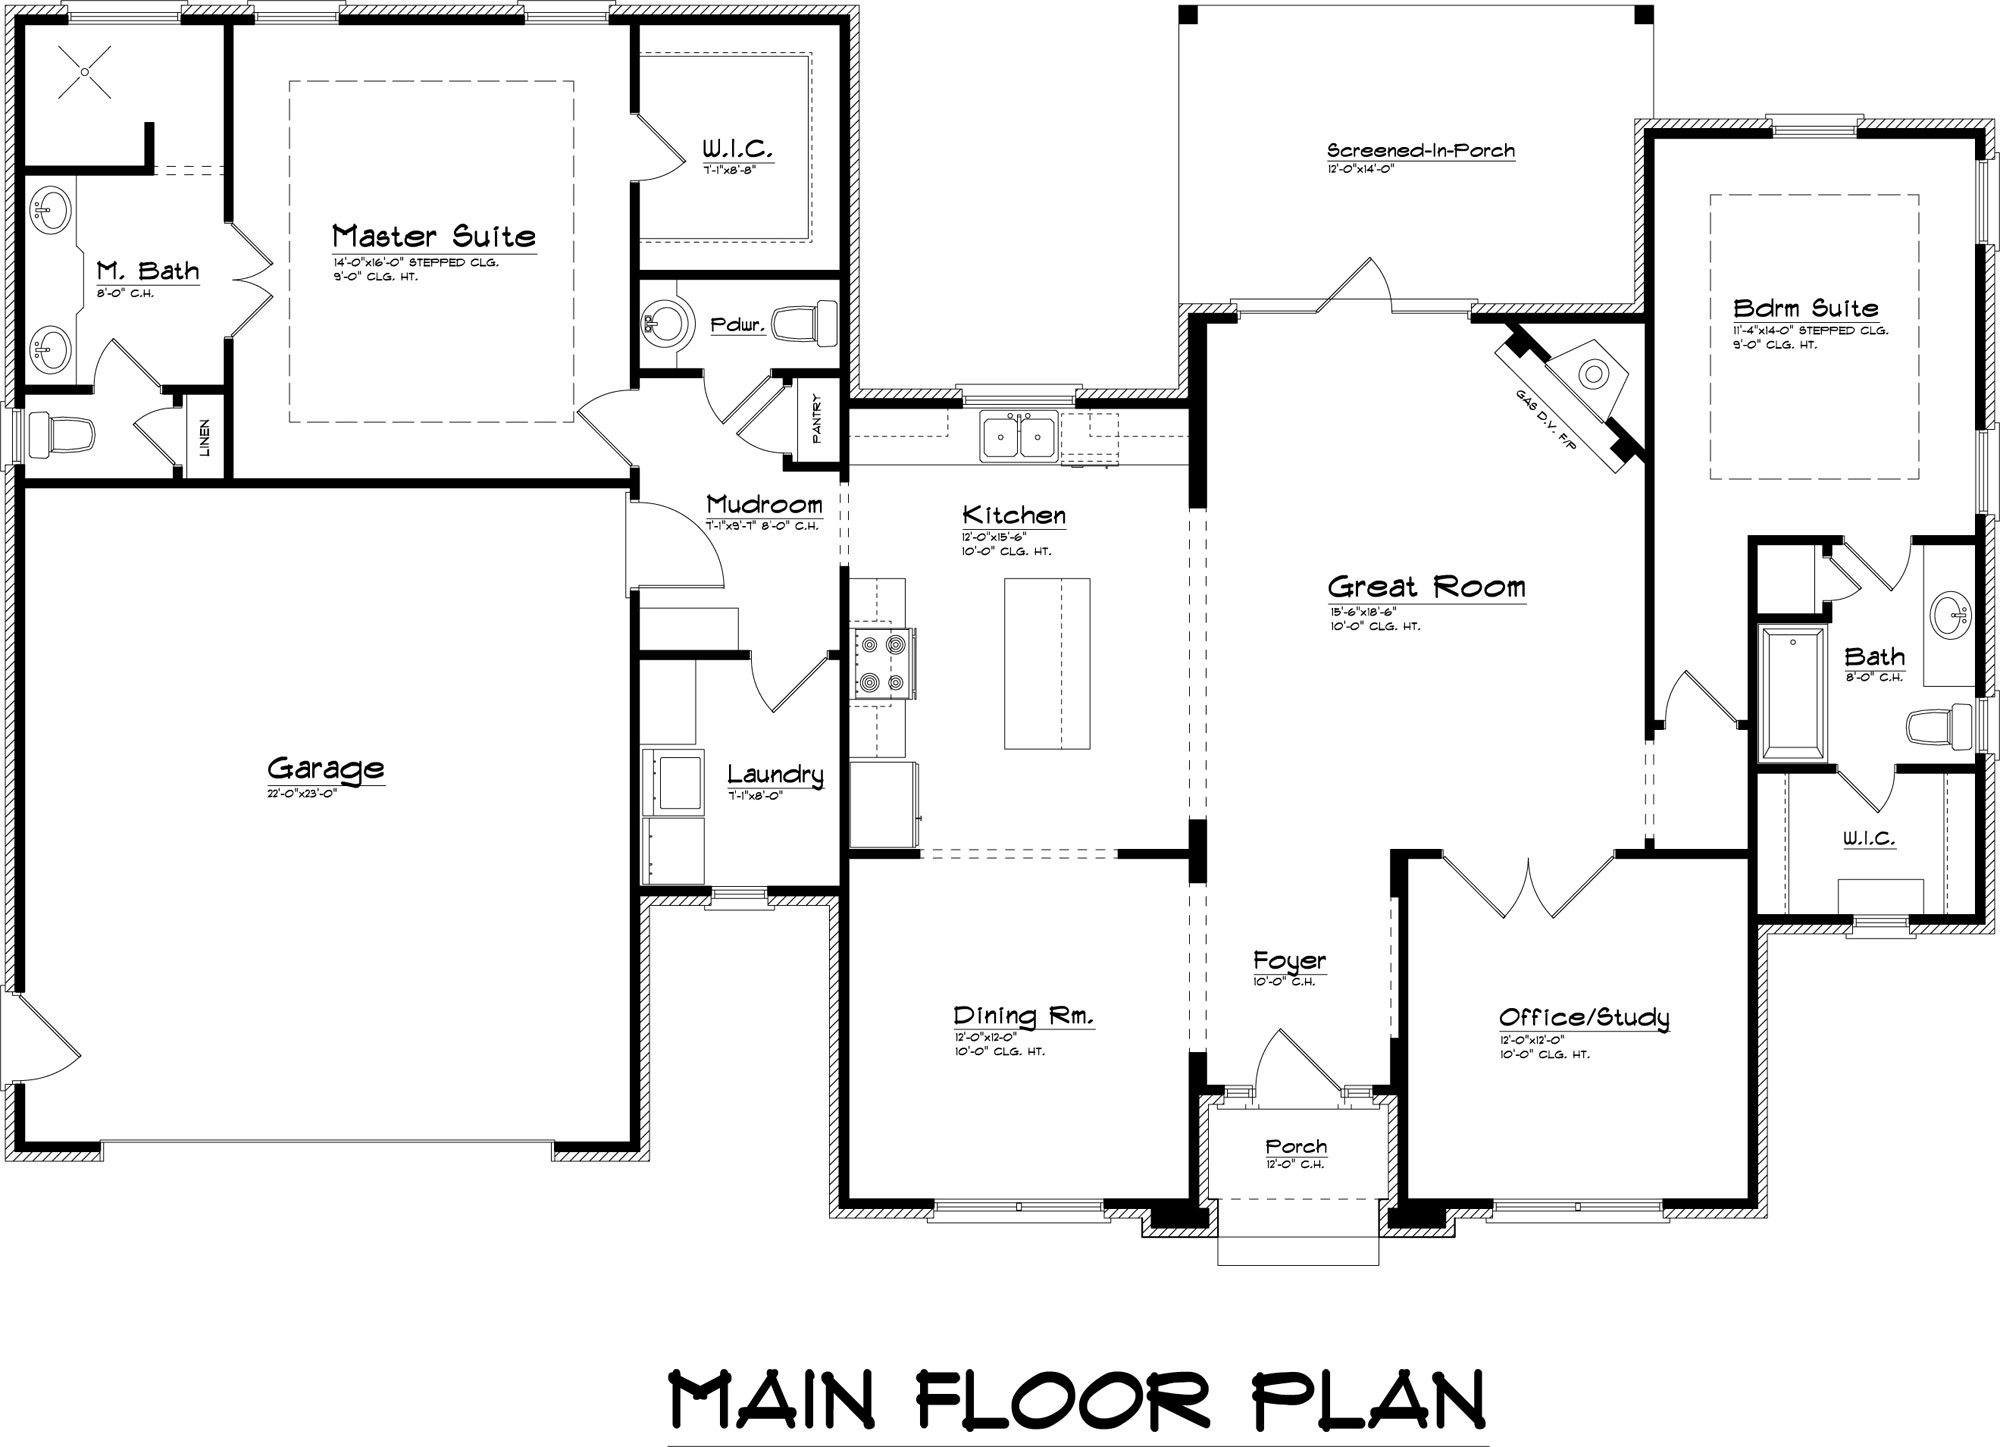 Floor Plan In Main Floor Plan Design Applied In Master Suite Floor Plans Equipped With Detail View In Simple Idea Of Architecture House Designs  Master Suite Floor Plans Defining Effectiveness 